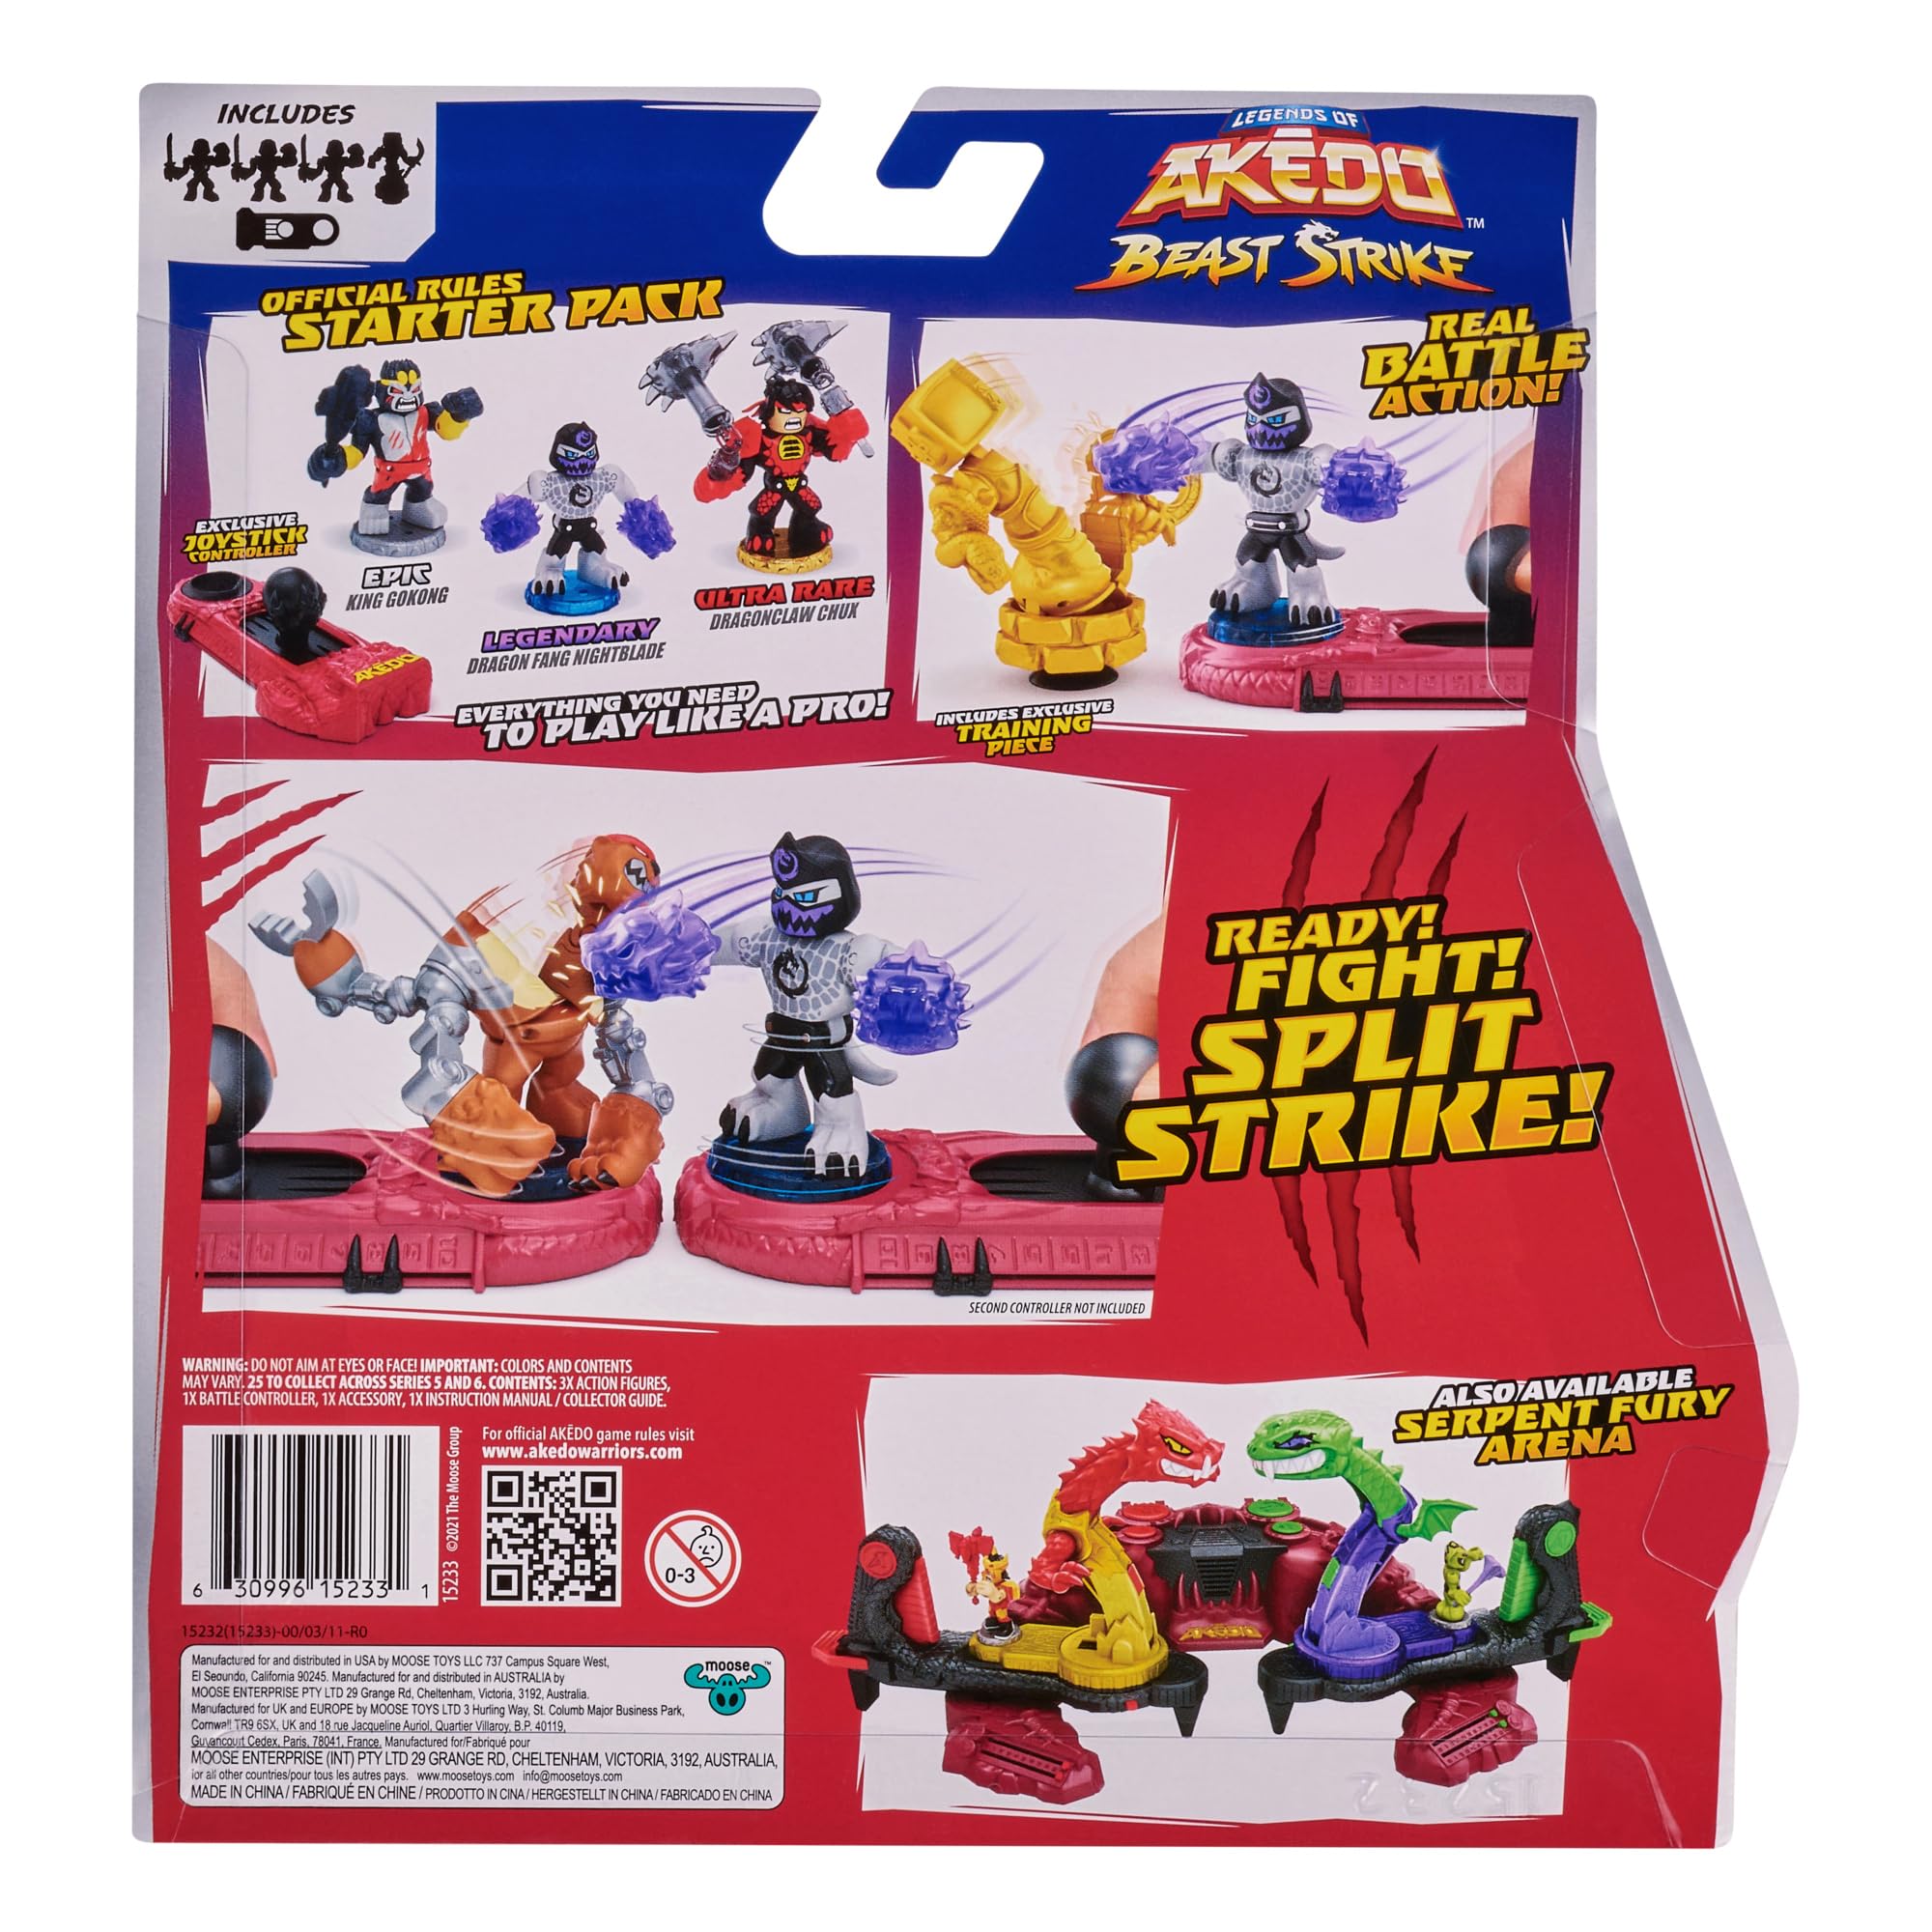 Legends of Akedo Beast Strike - Official Rules Bite Strike Starter Pack - 3 Mini Battling Warriors with Training Practice Piece and Exclusive Joystick Controller